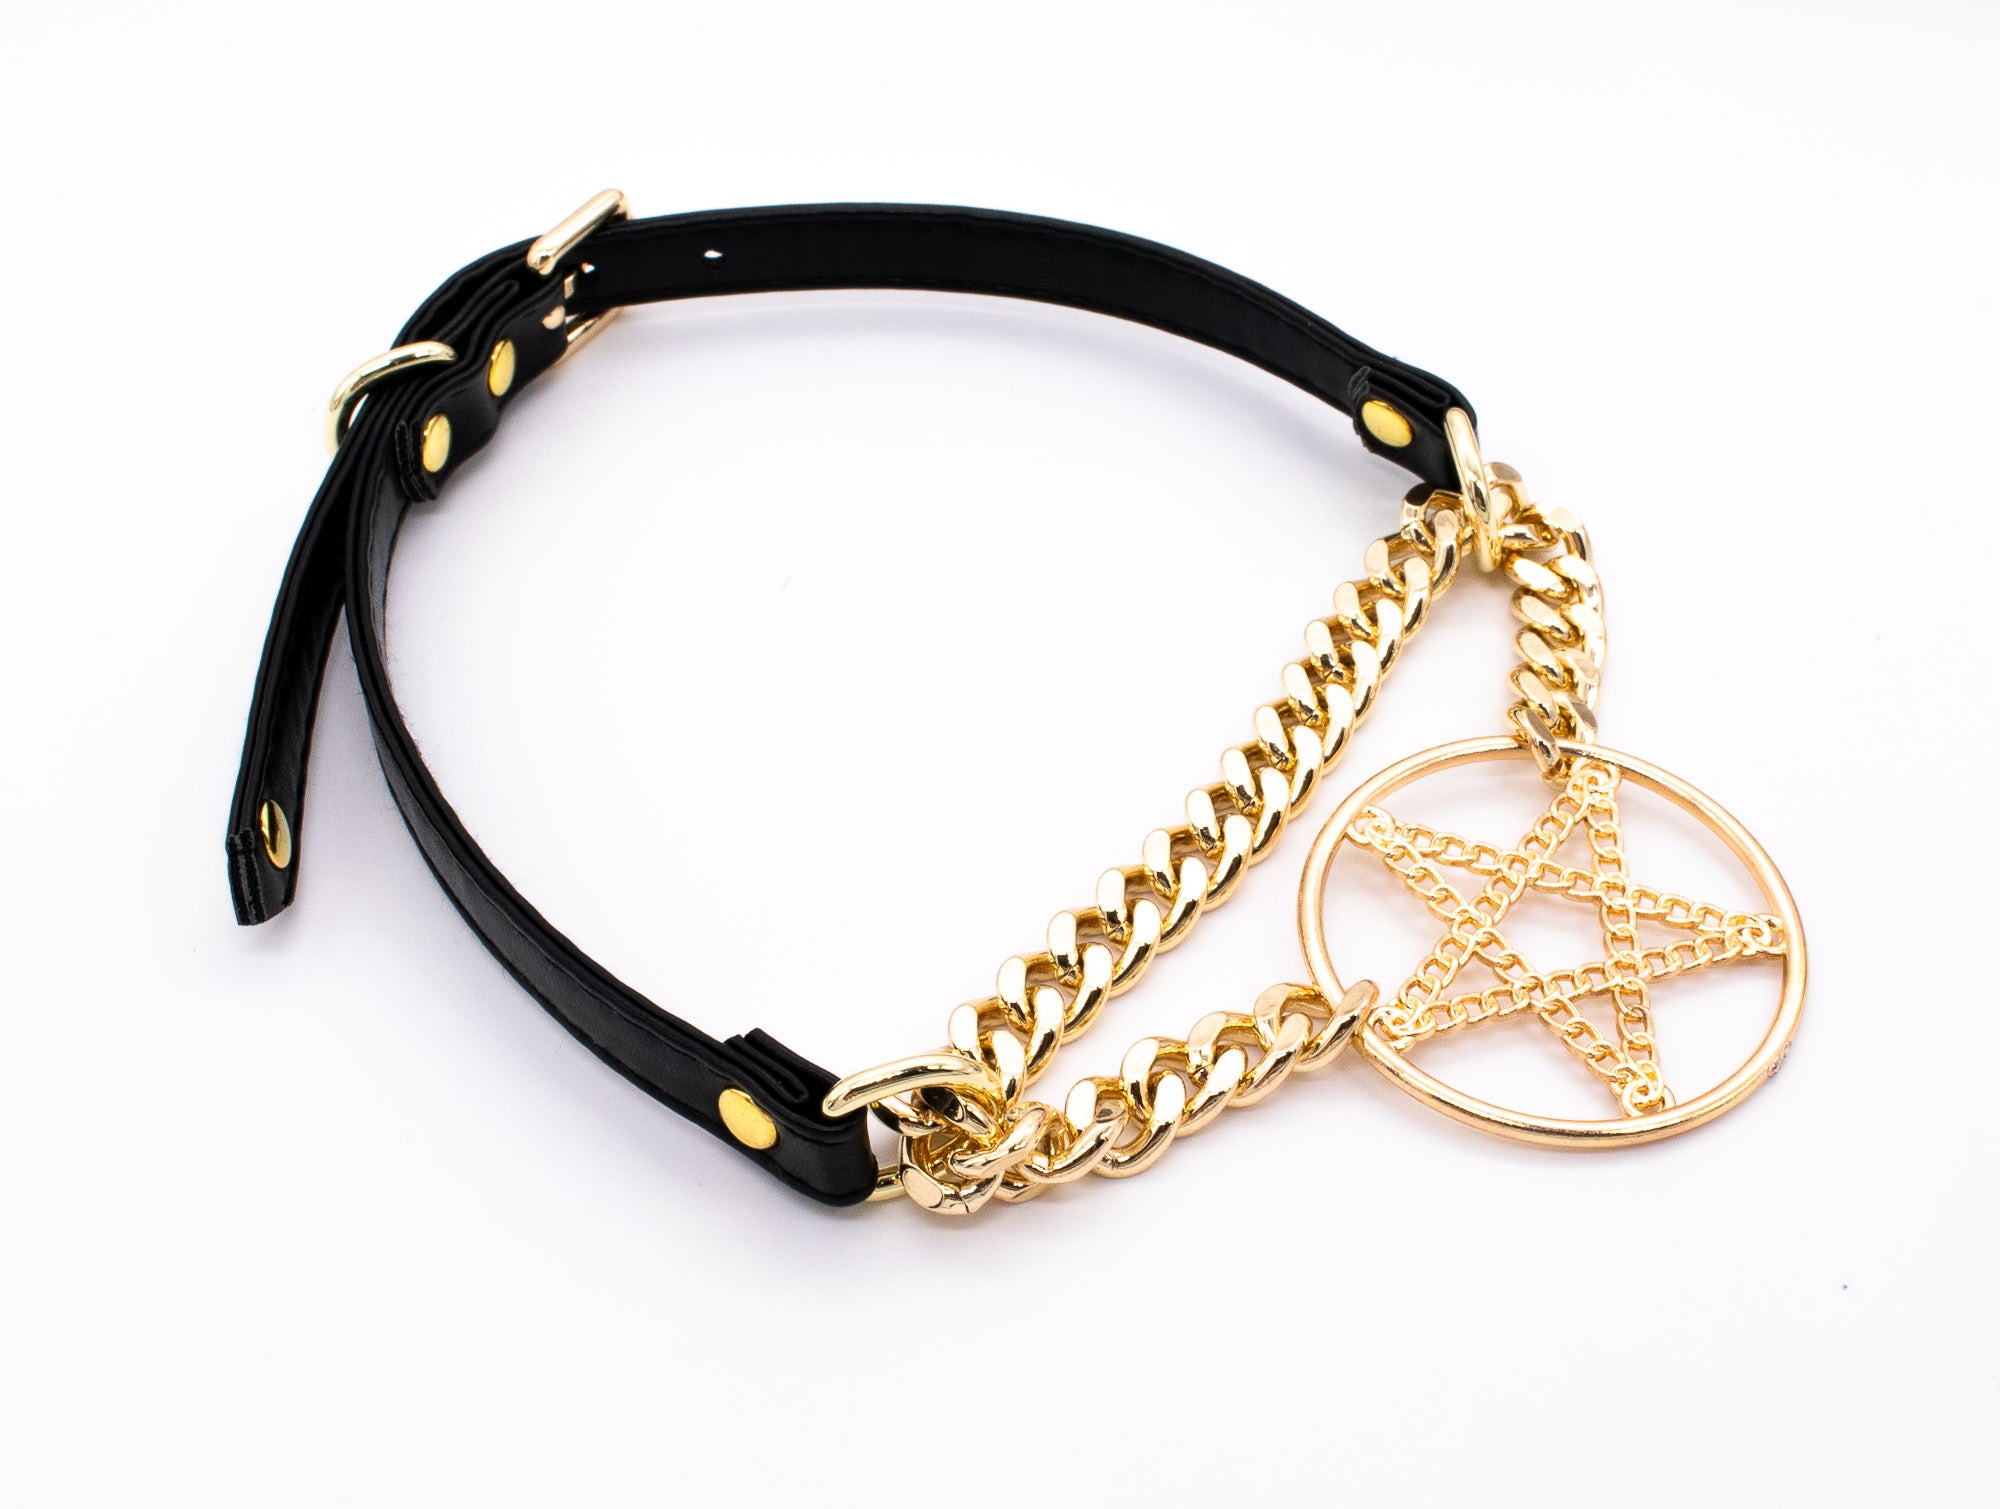 3/8" Black Pentacle Vegan Leather Martingale Collar in Gold